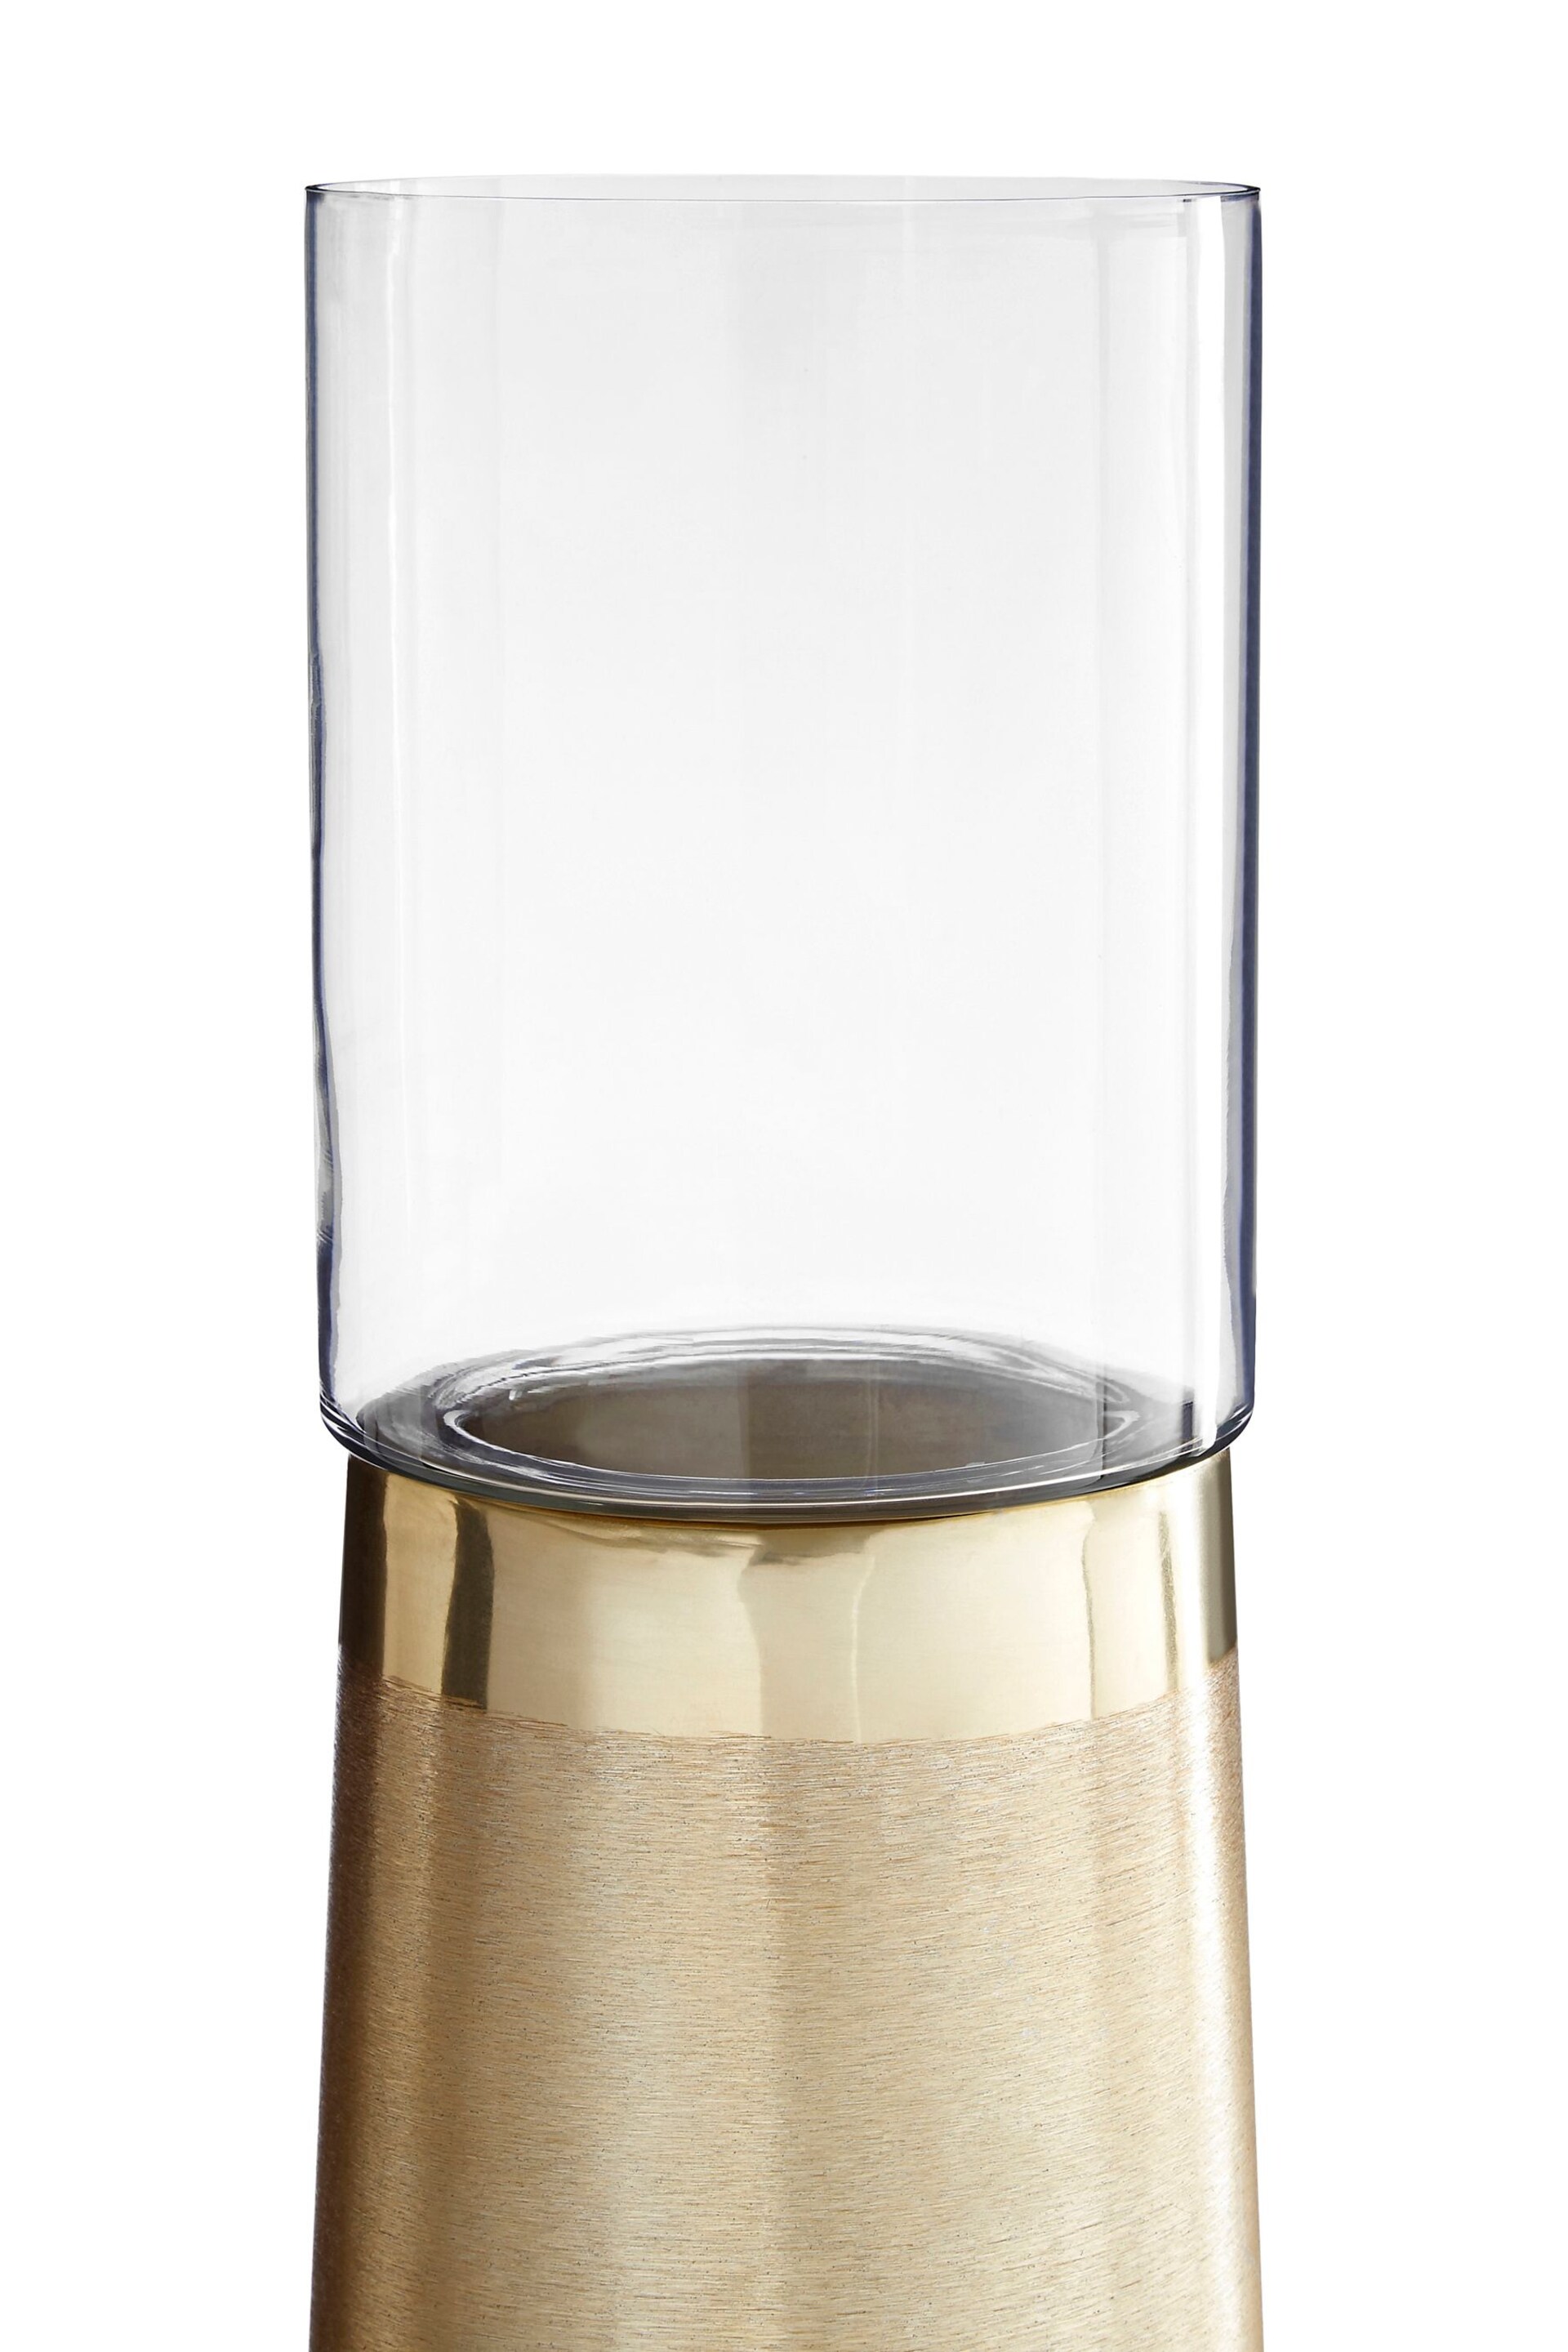 Fifty Five South Brush Gold Pillar Candle Holder - Image 4 of 4